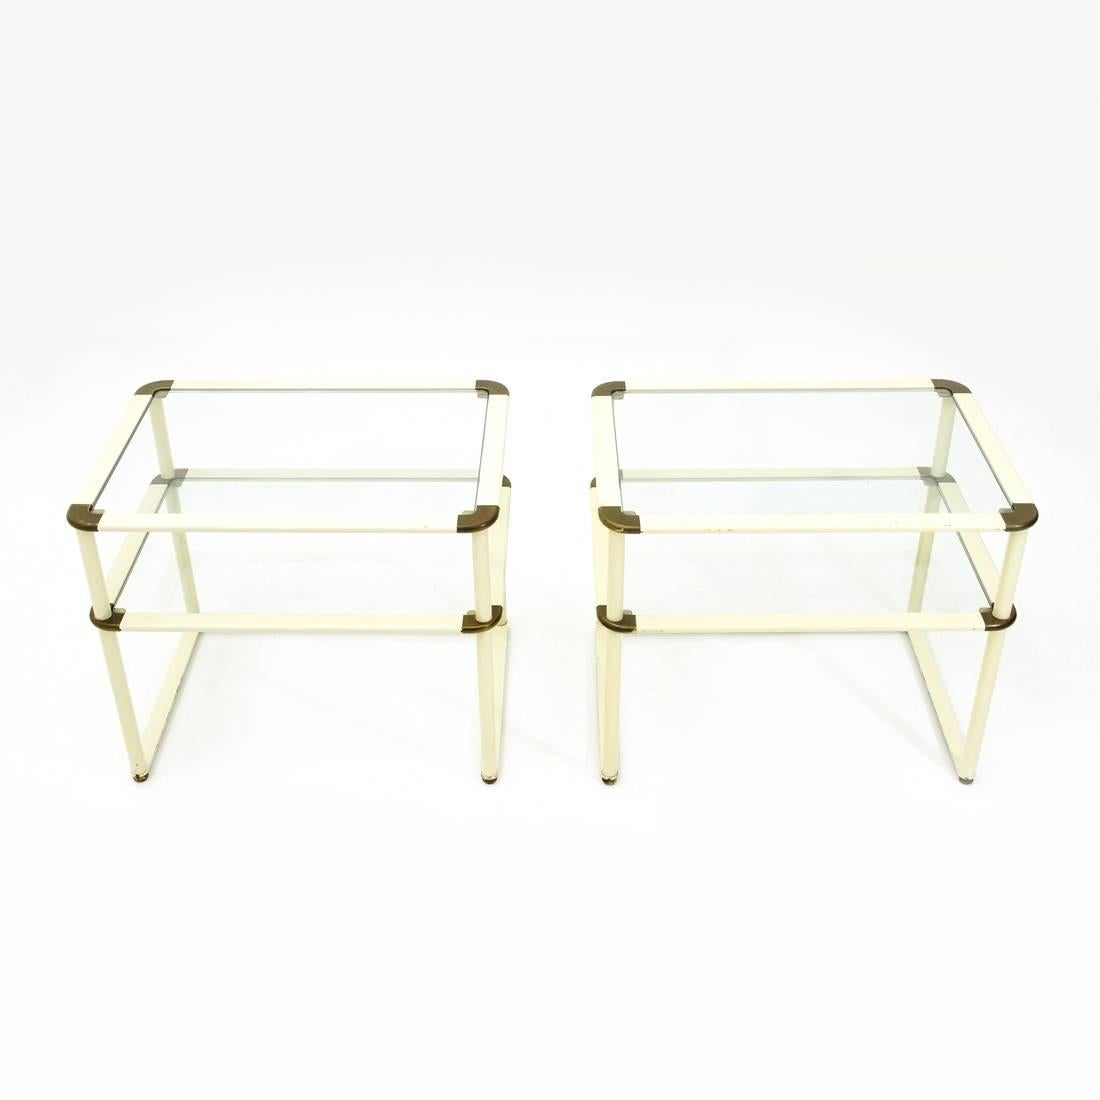 Pair of bedside tables of Italian manufacture of the 1980s.
Structure in brass and white painted metal.
Two glass tops.
Foot with hexagonal shape in brass.
Structure in good condition, some signs due to normal use over time.

Dimensions: Width